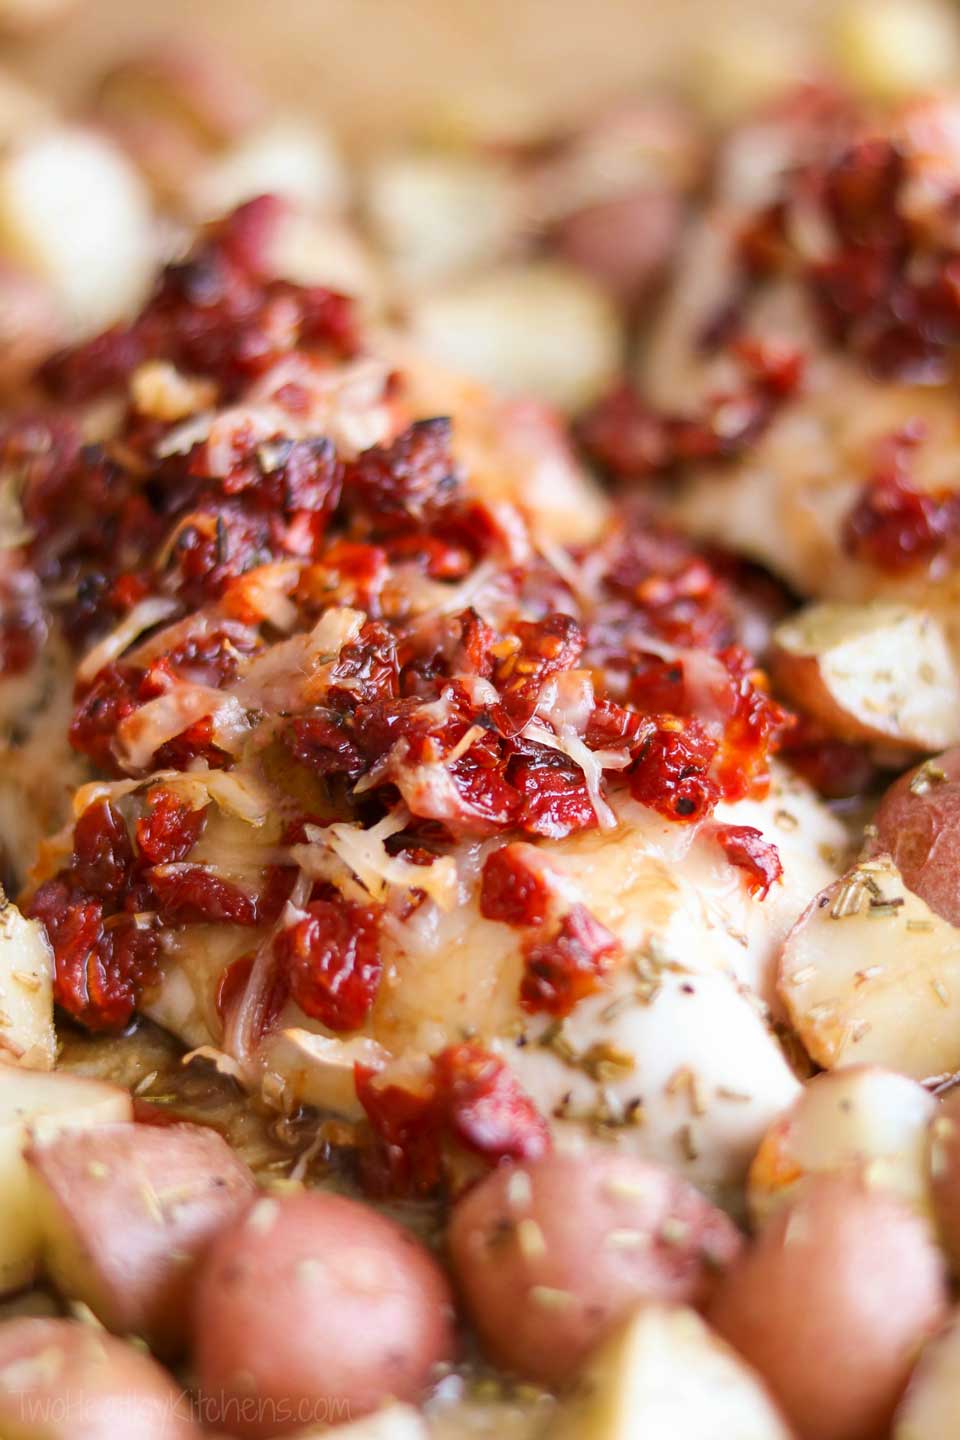 Incredibly delicious, with such easy cleanup! This sheet pan chicken dinner recipe features tender, juicy chicken breasts and perfectly baked redskin potatoes. All accented with rosemary, crowned with a scrumptious topping of sun-dried tomatoes and Italian cheeses, then finished with a honey-balsamic drizzle! This sheet pan supper recipe takes chicken and potatoes to a whole new level! Easy enough for weeknight dinners (make-ahead tips!), special enough for company! | www.TwoHealthyKitchens.com